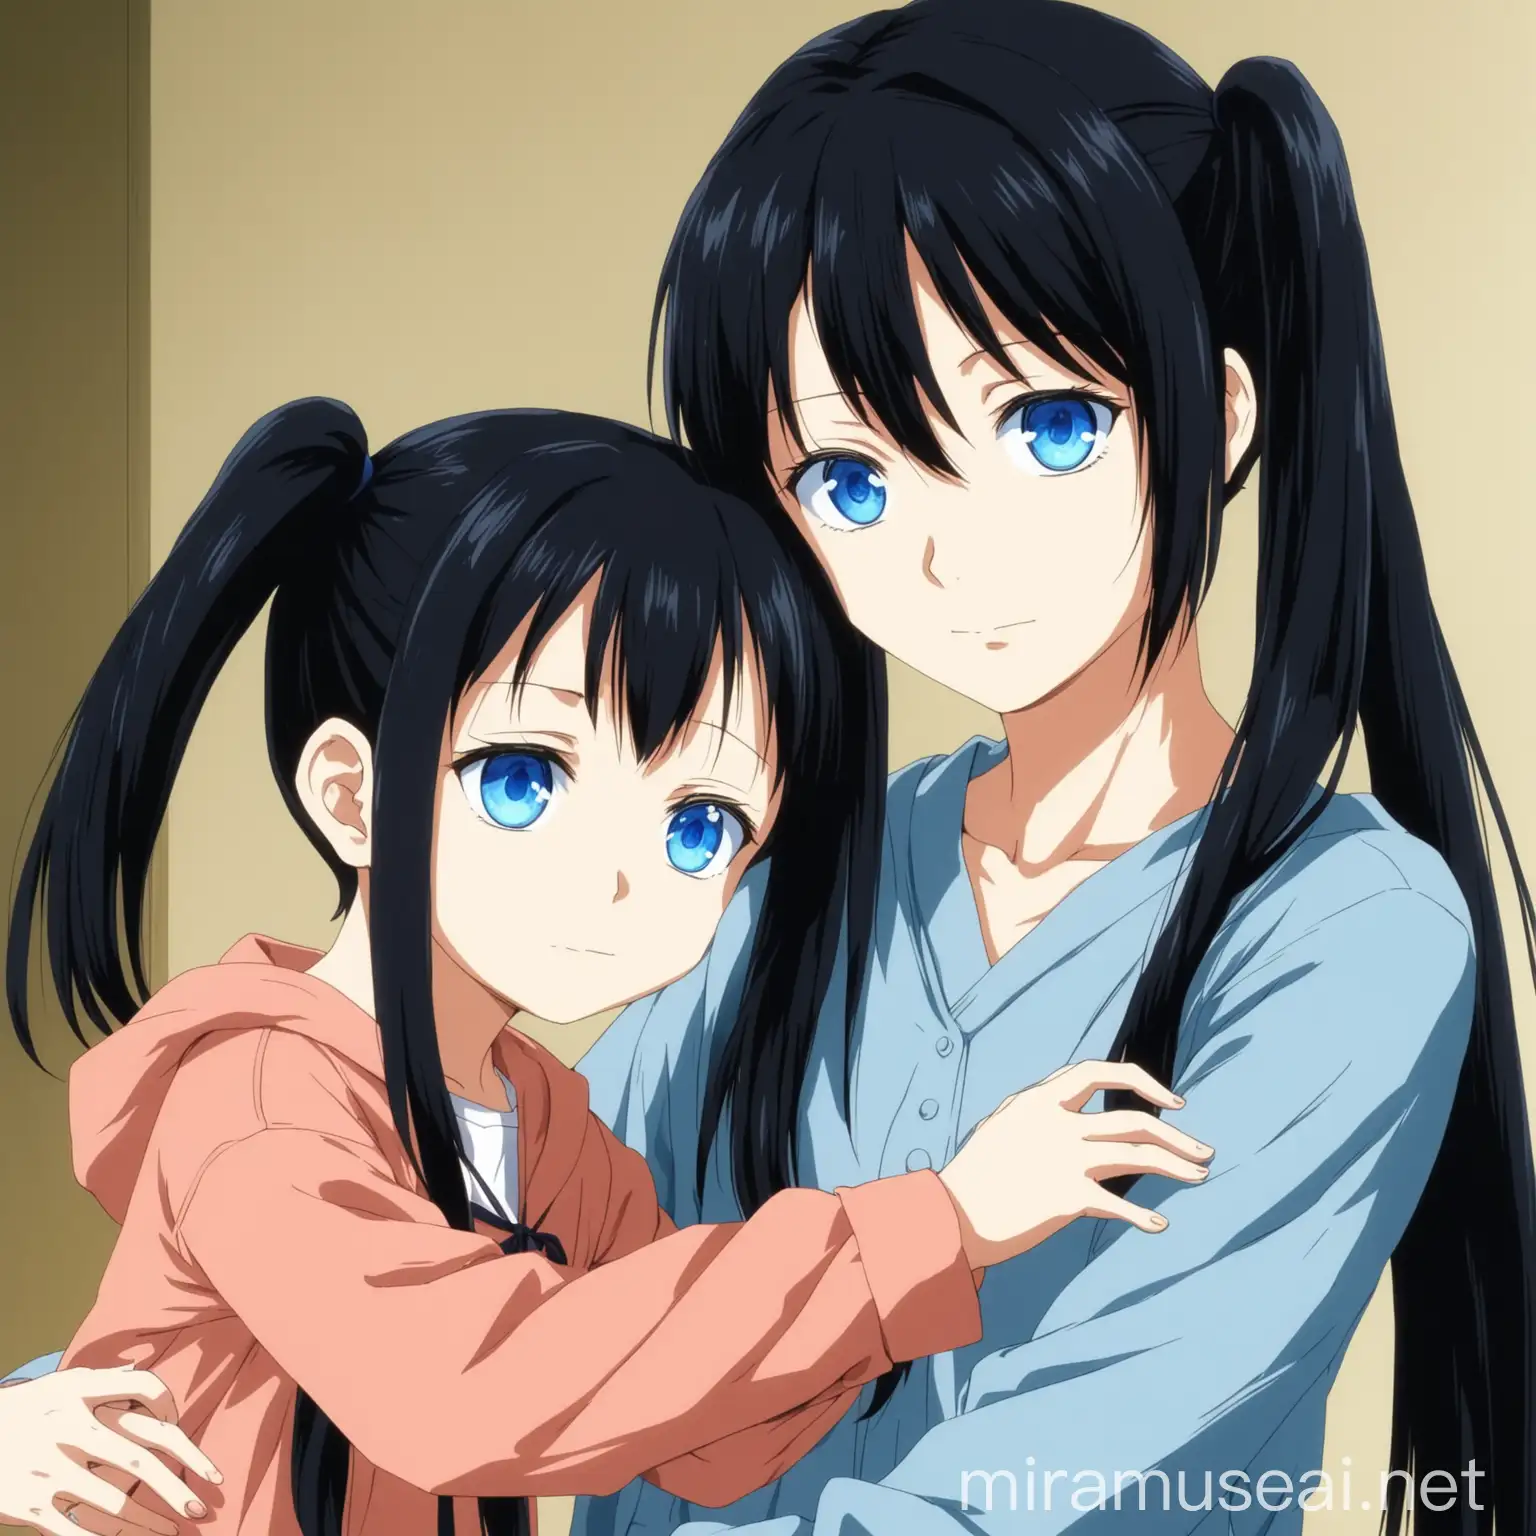 23 years old anime girl with black twintail and blue eyes with a 5 year old daughter